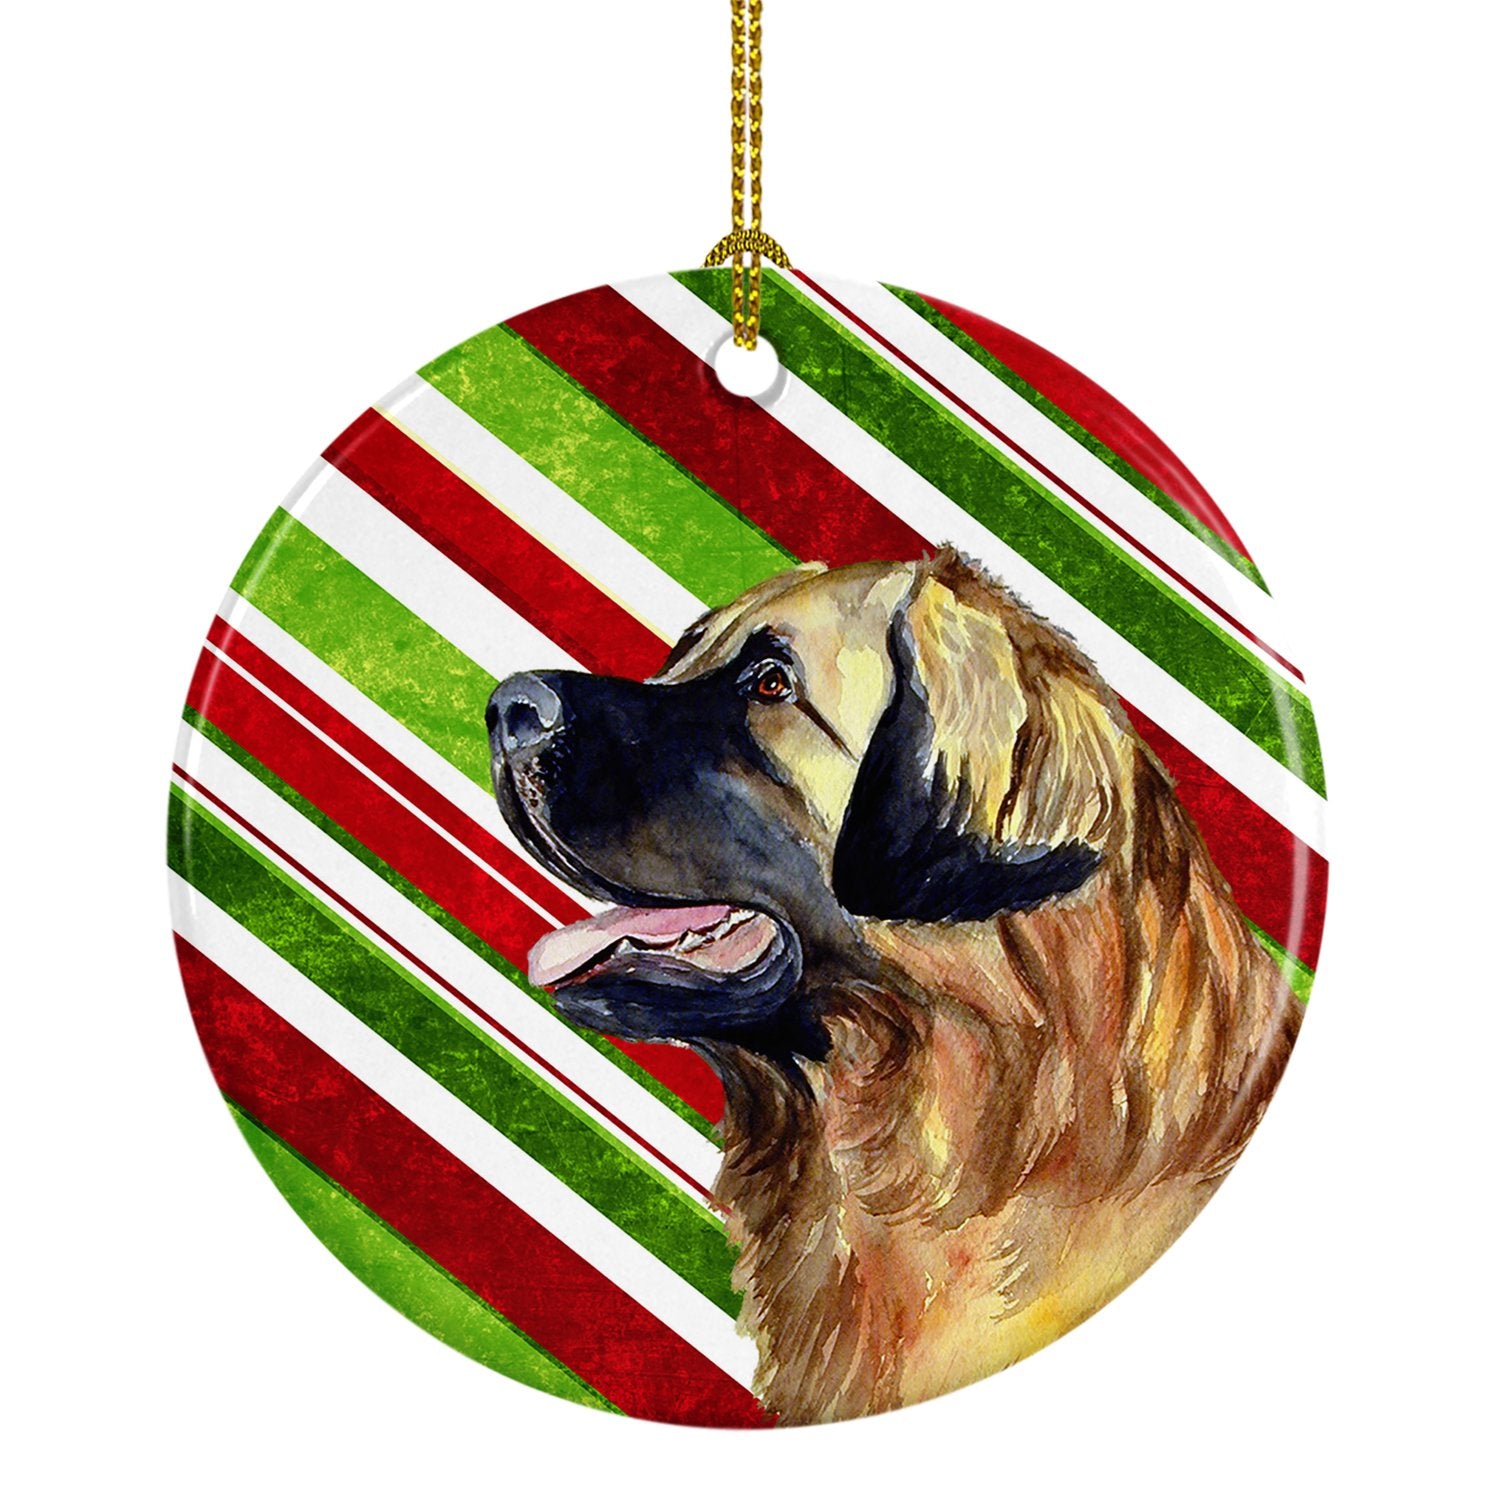 Leonberger Candy Cane Holiday Christmas Ceramic Ornament LH9258 by Caroline's Treasures